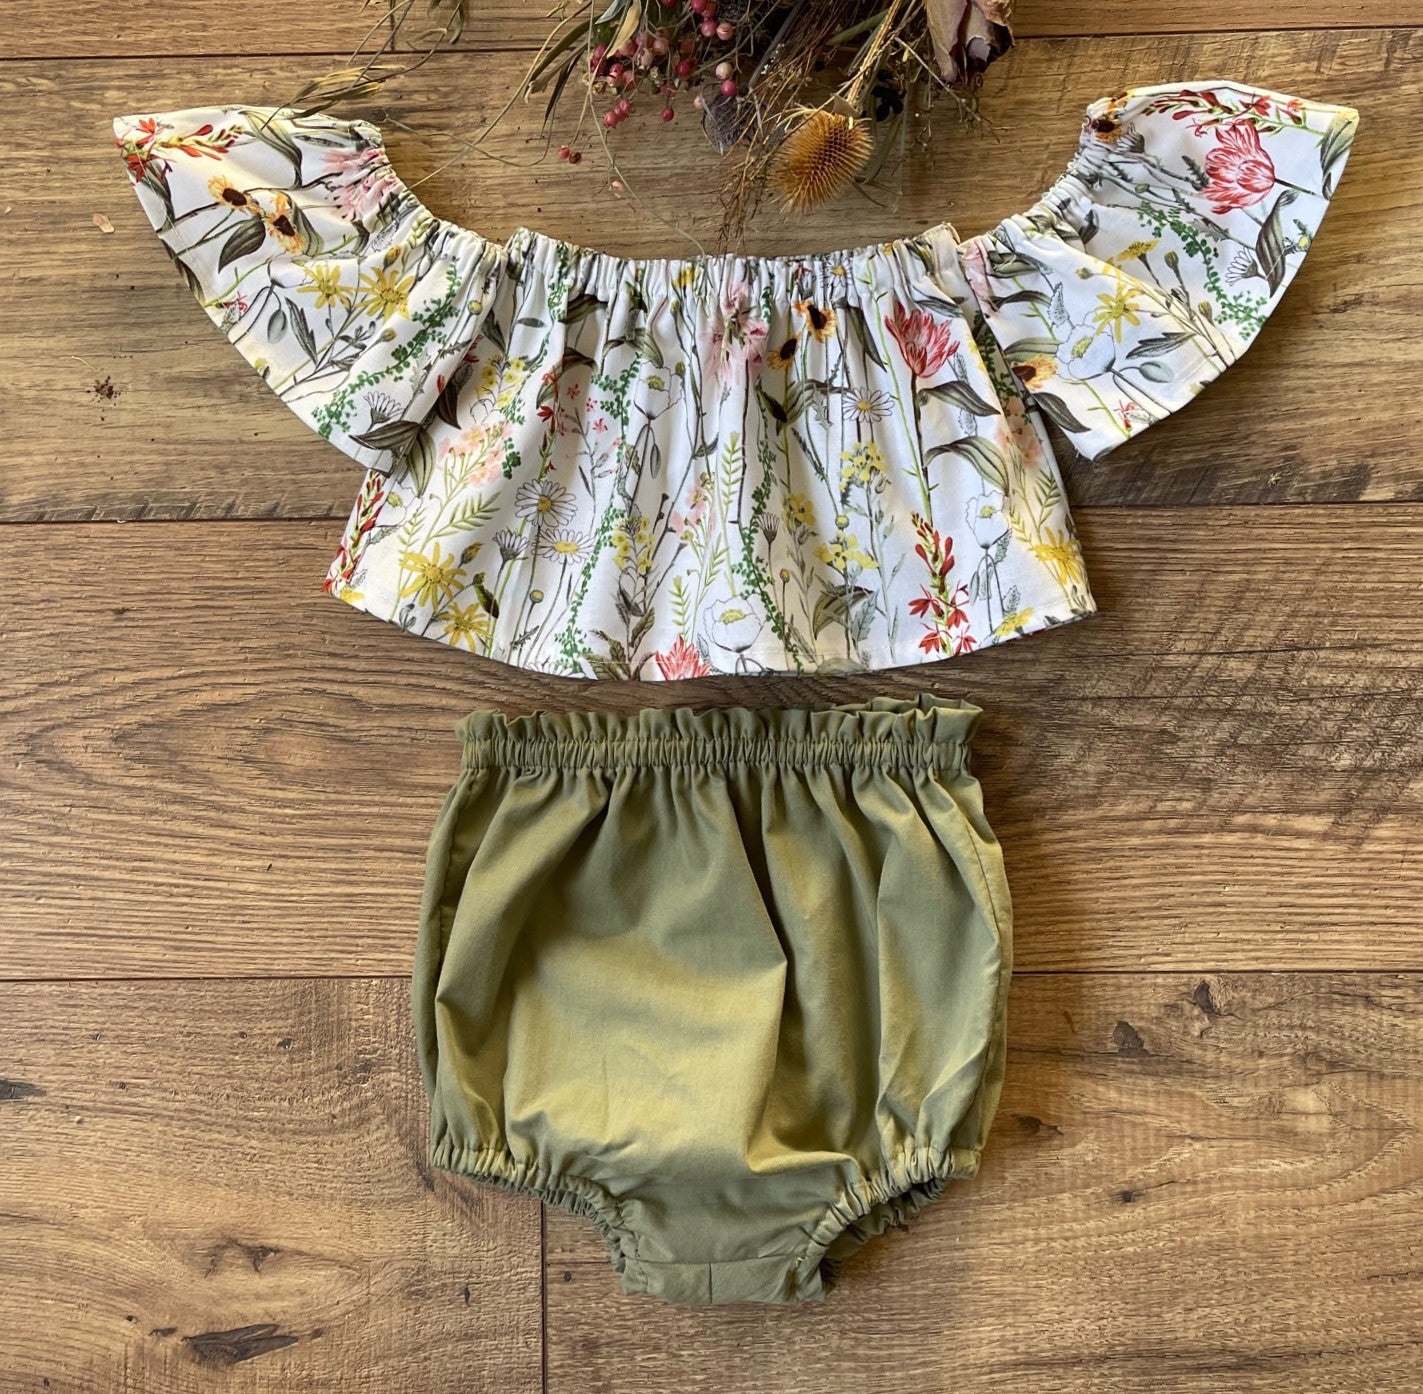 Girls Infant Toddler 2 Piece Floral Wildflowers Boho Style Outfit Off the Shoulder Top Green Bloomers Diaper Cover